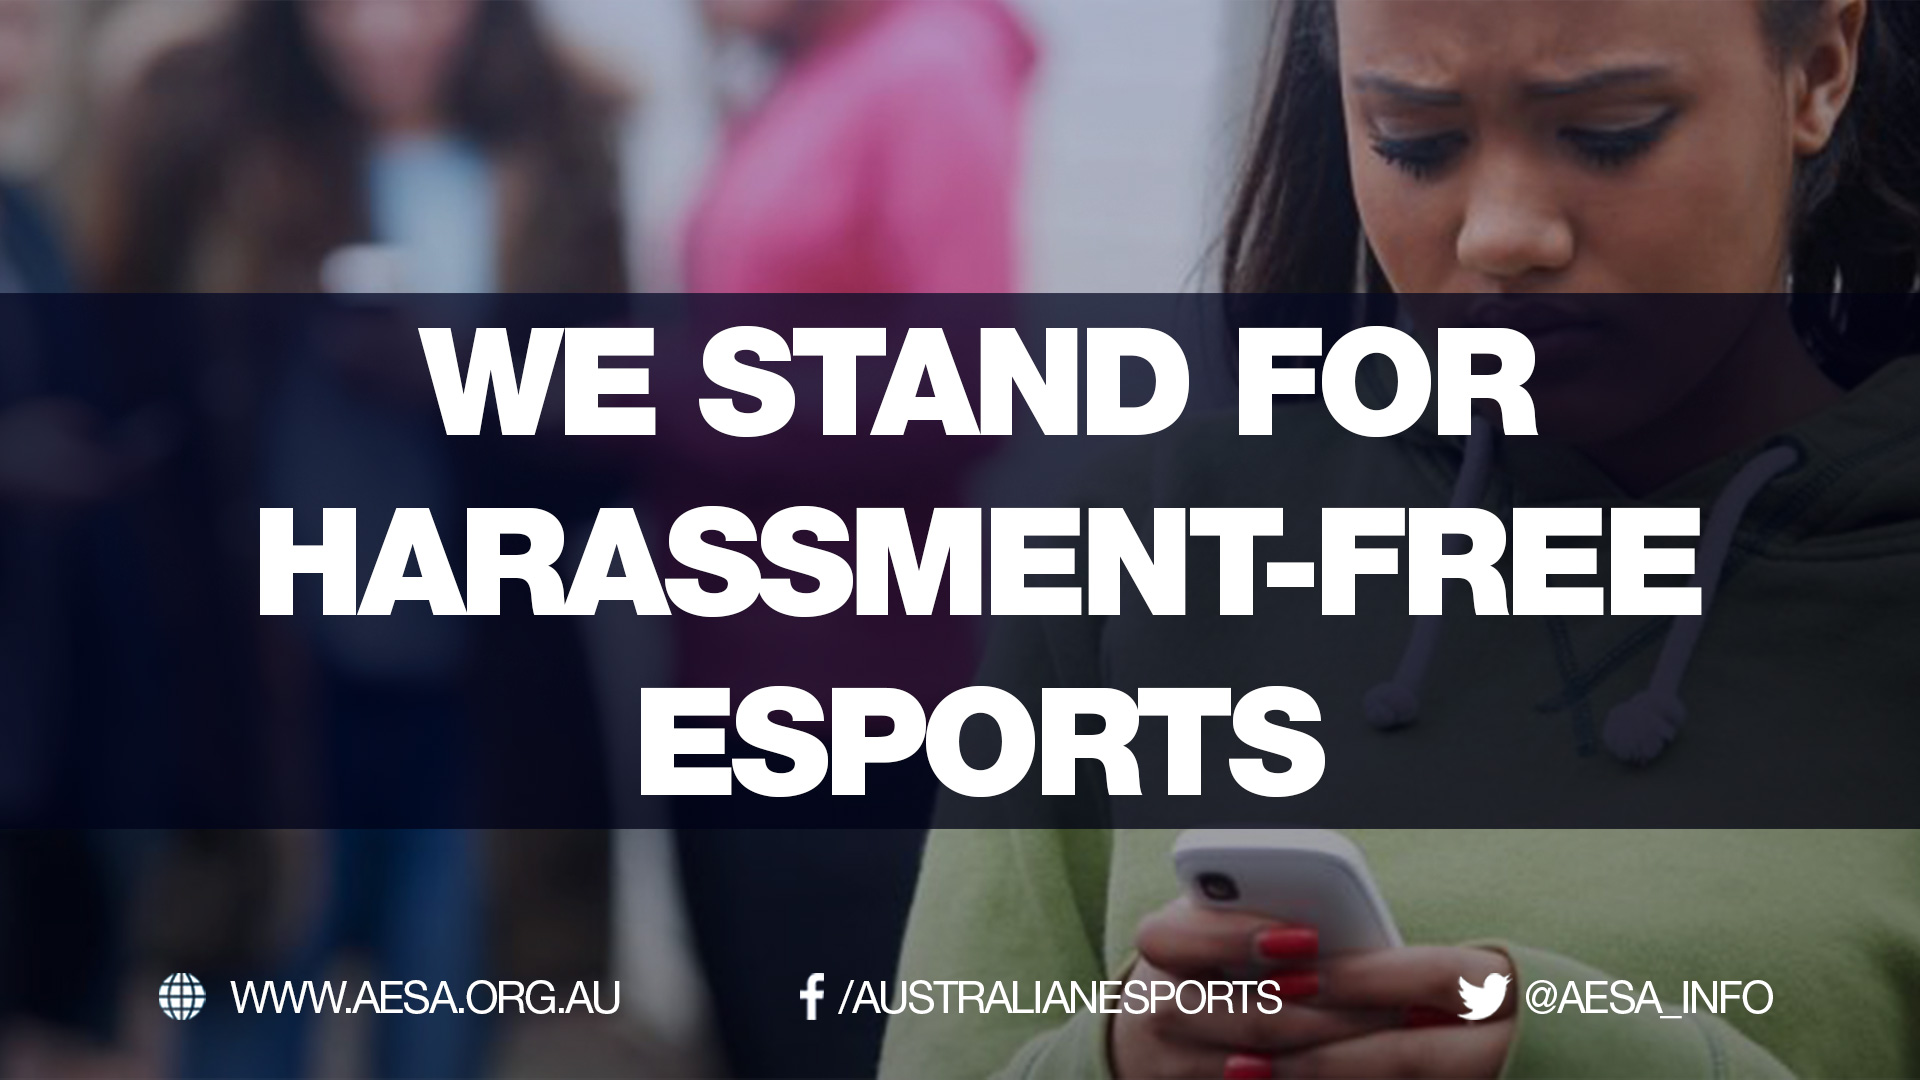 We stand for harassment-free esports